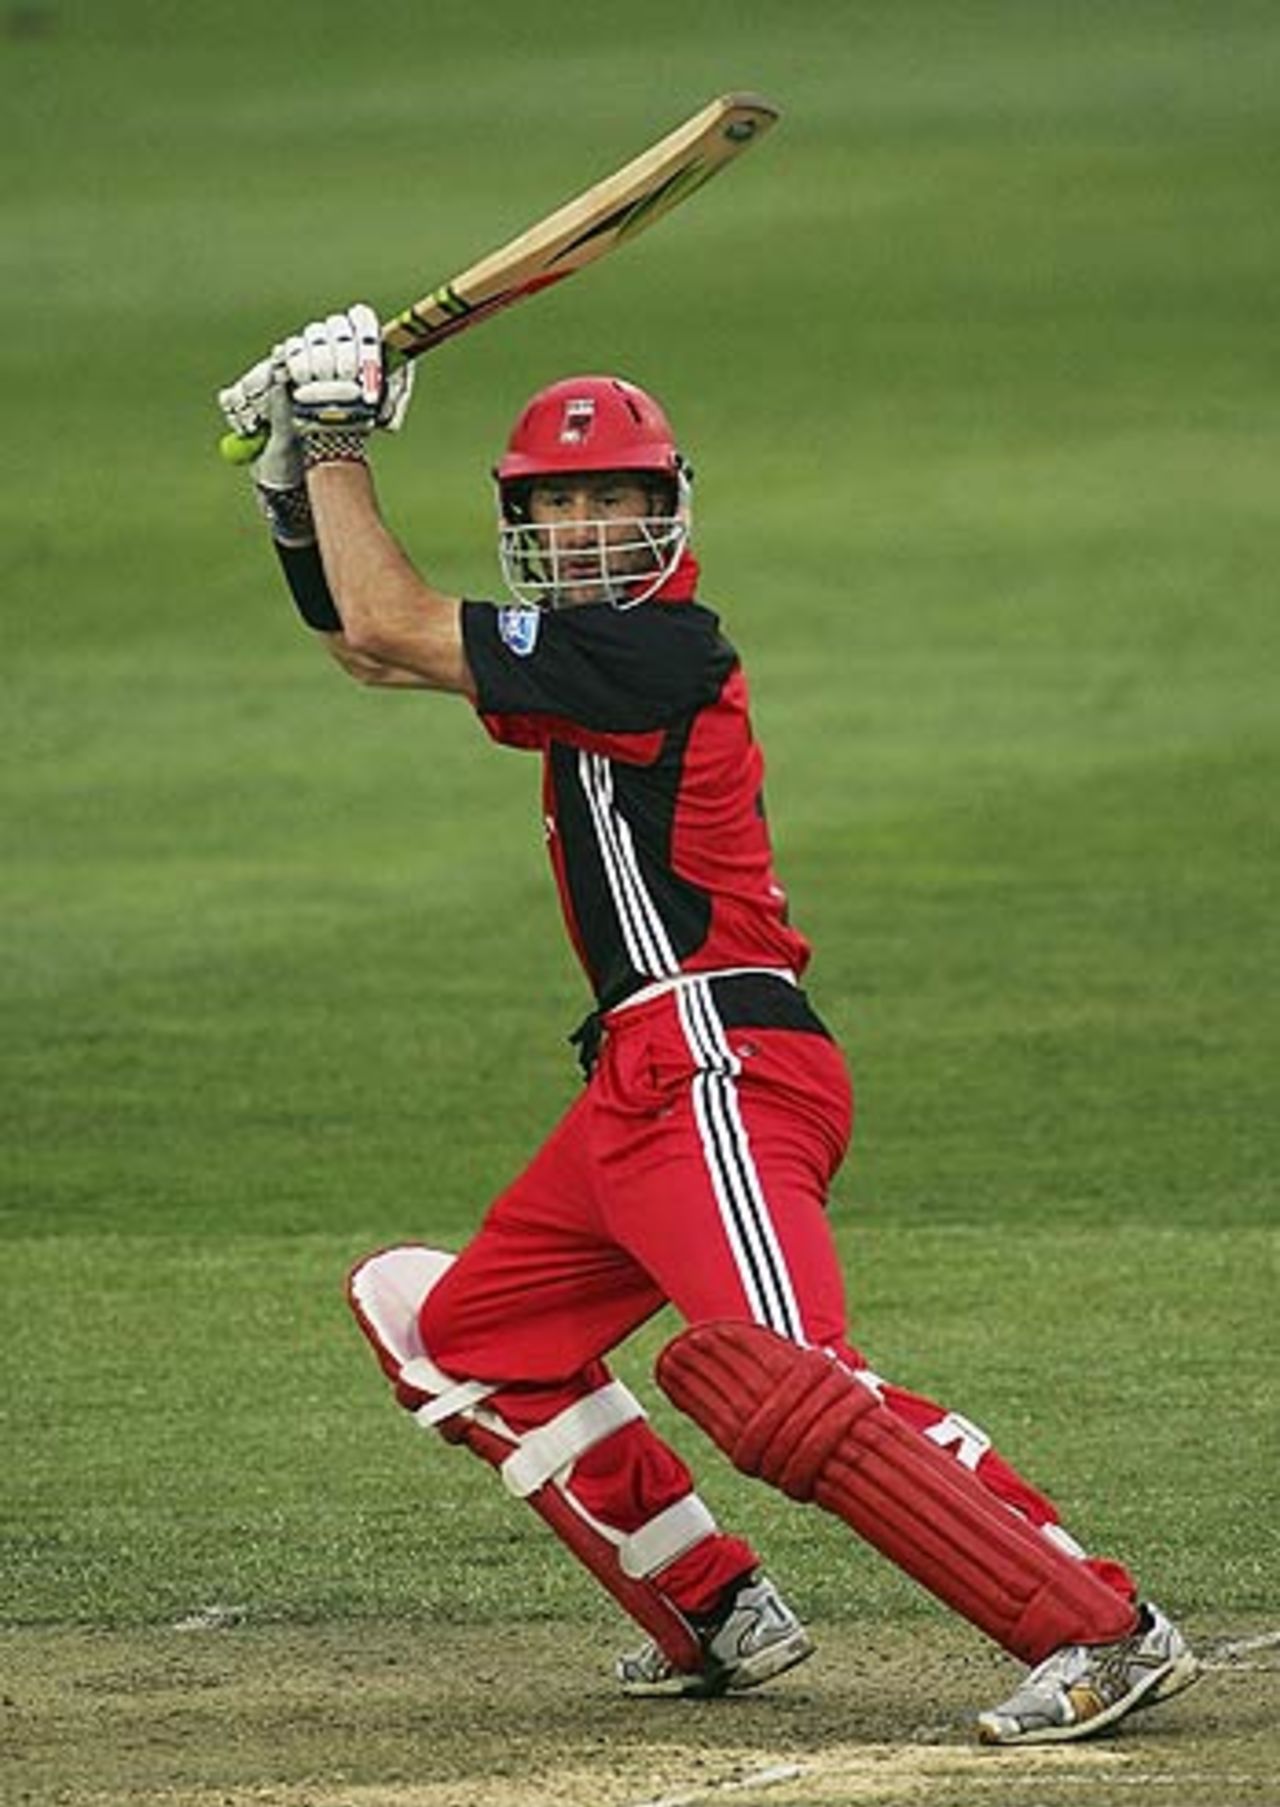 Matthew Elliott on his way to a match-winning 111 of 112 balls, New South Wales v South Australia, Ford Ranger Cup, Sydney, October 15, 2006